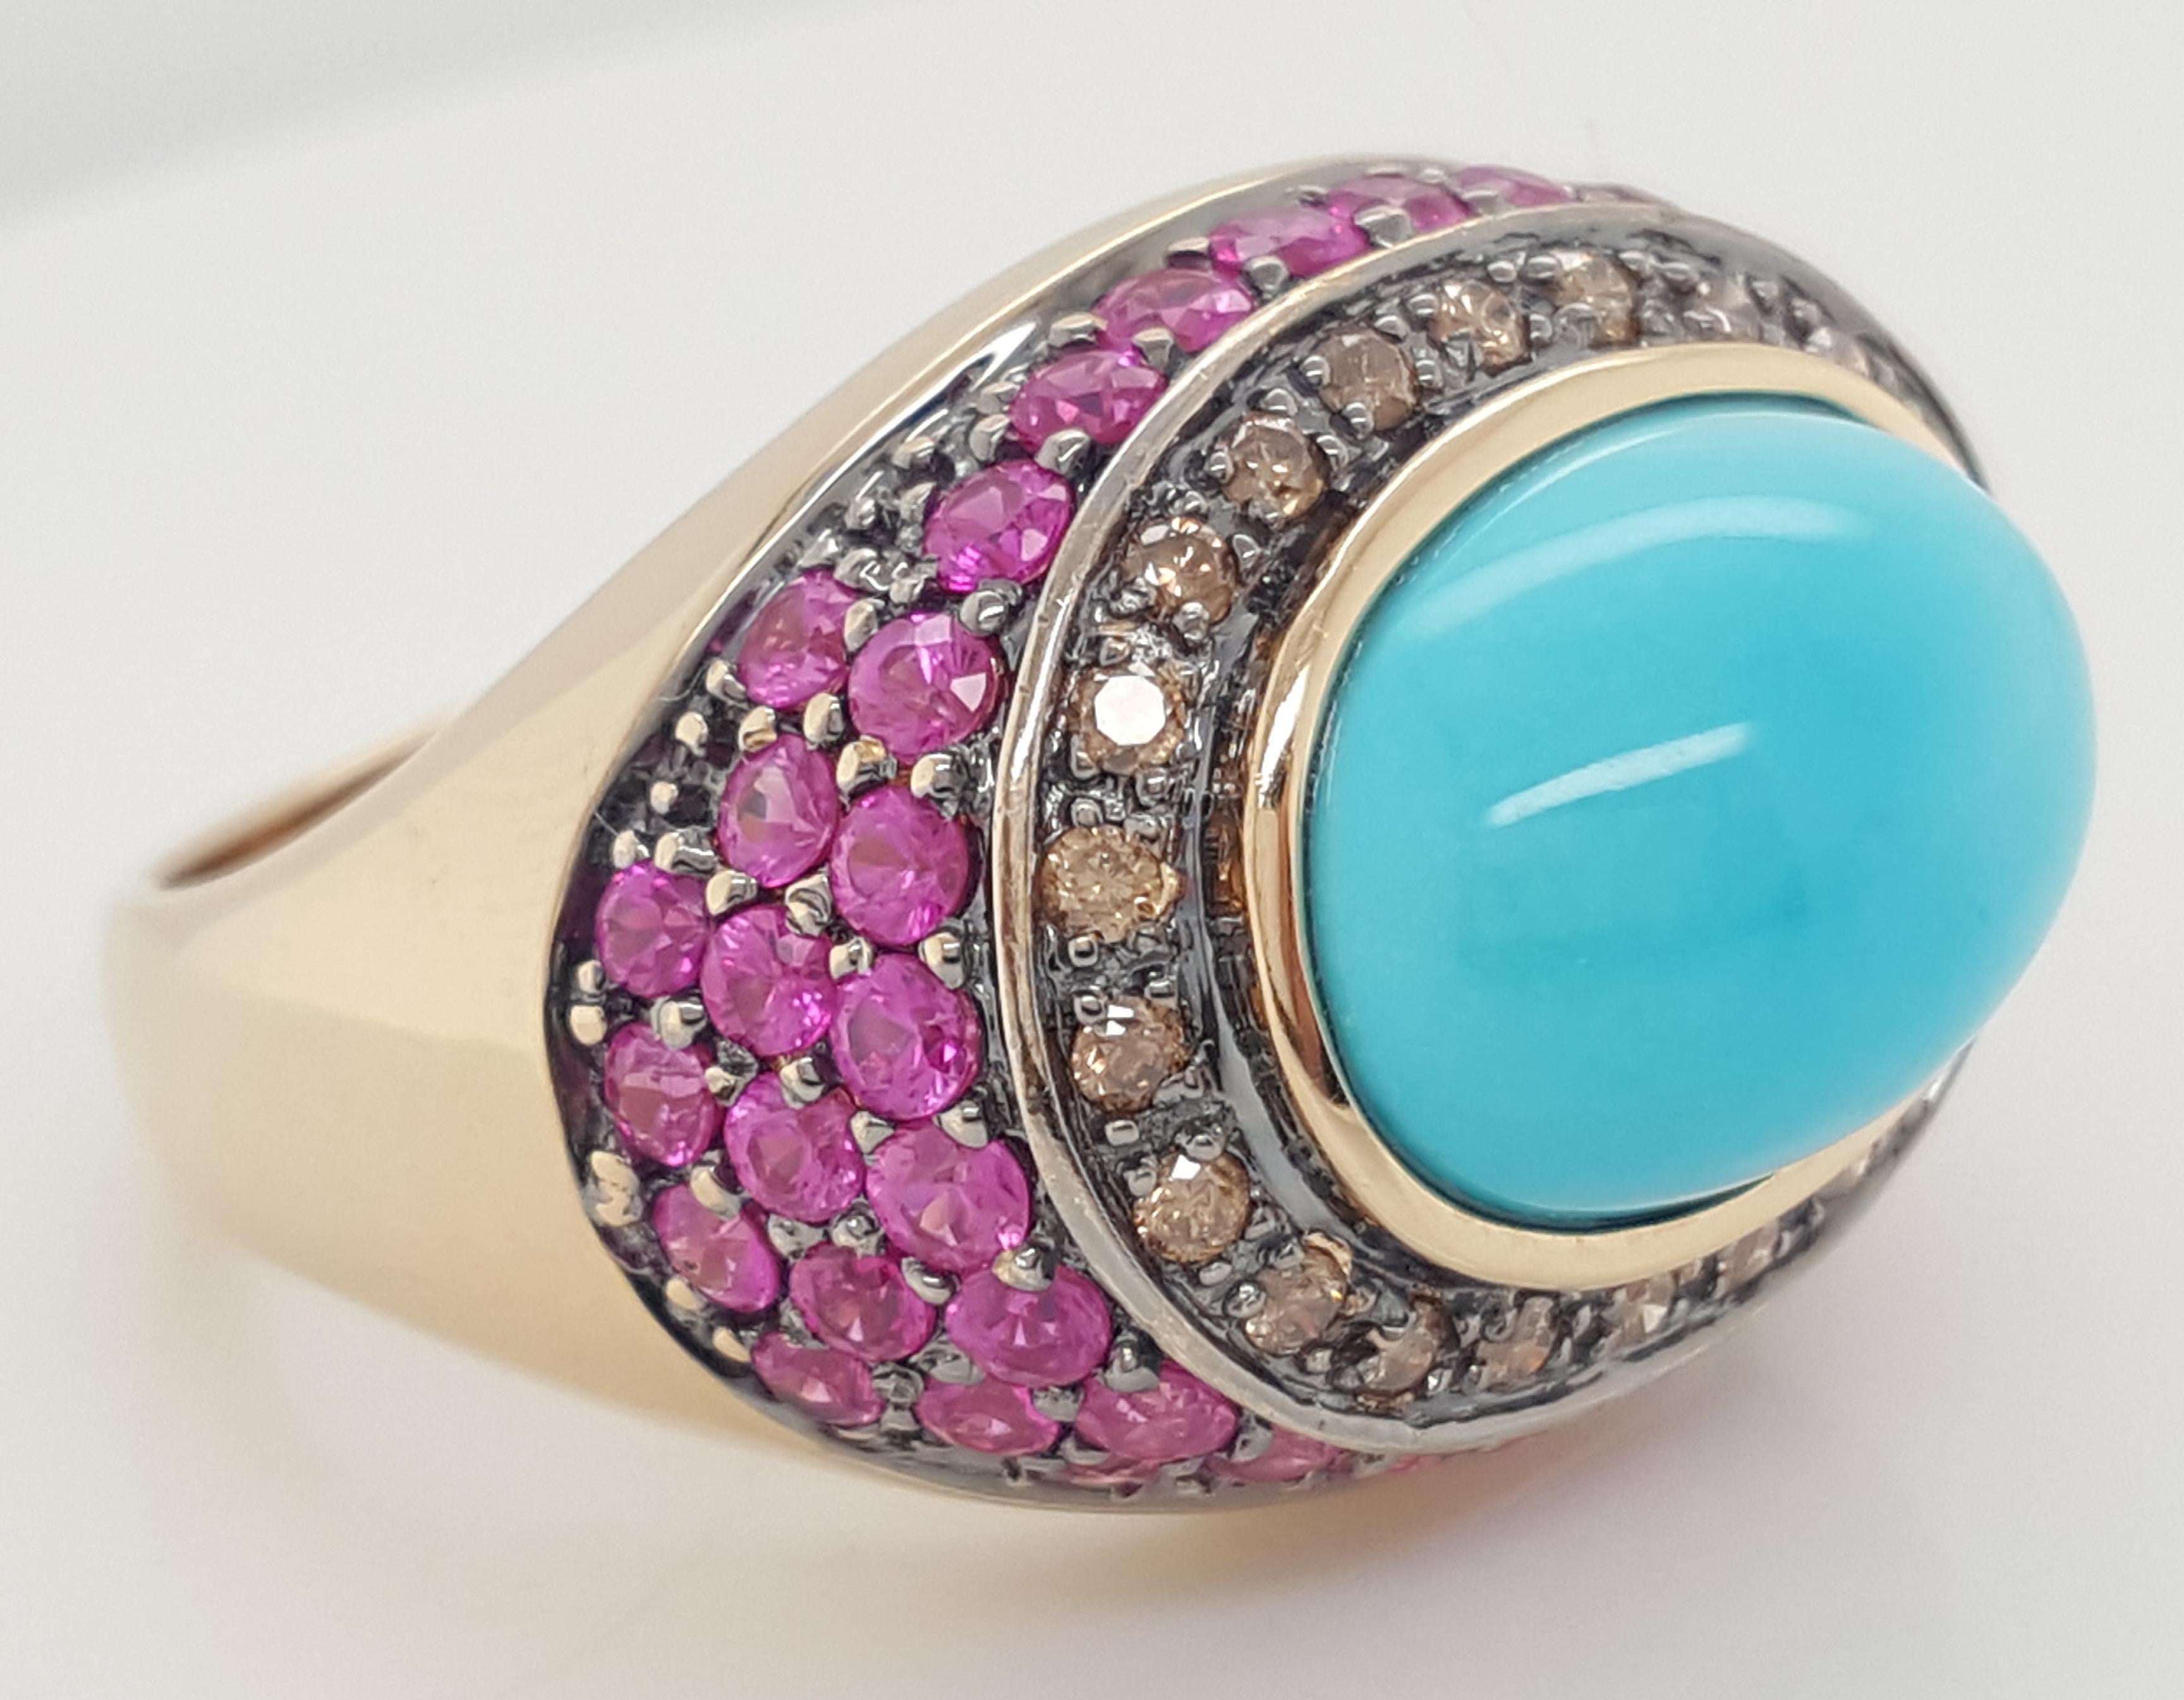 LeVian Robins Egg Blue Turquoise Diamond and Ruby 14 Karat Yellow Gold Ring 3